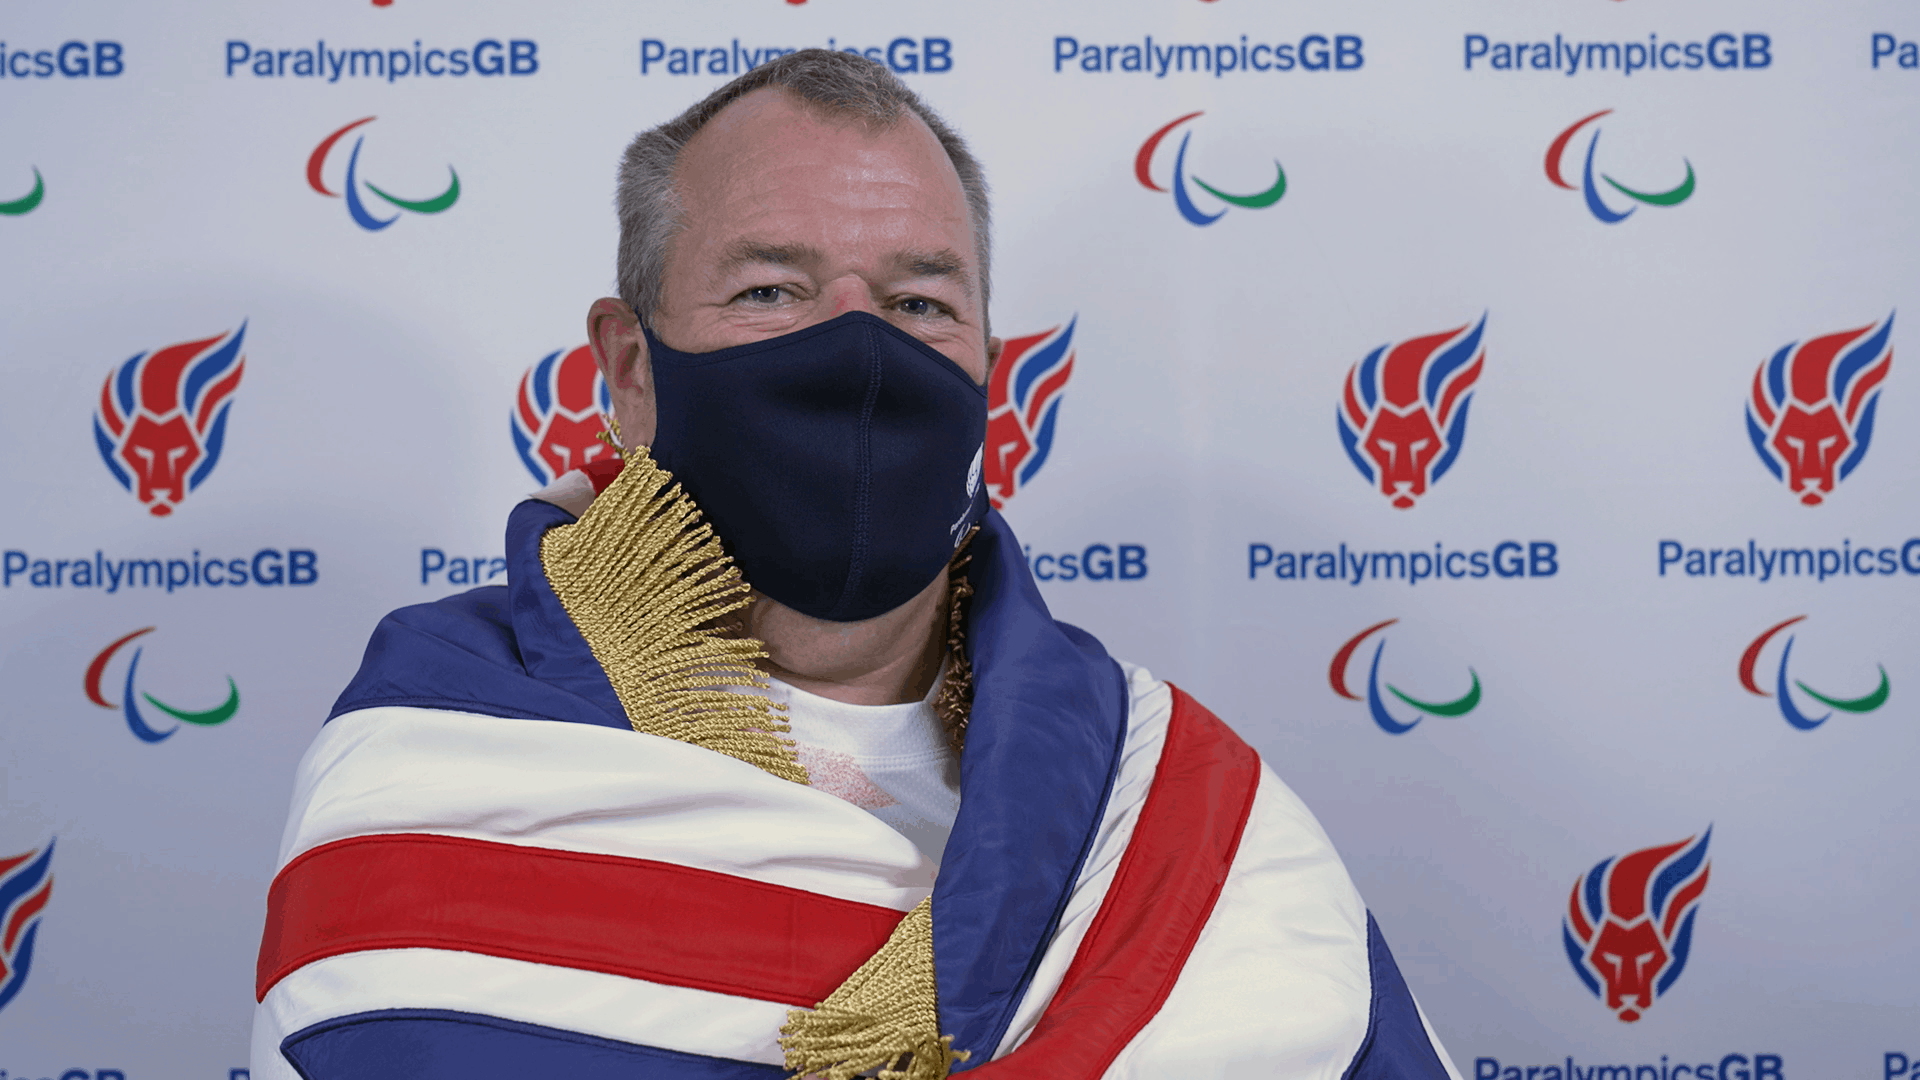 Archer John Stubbs to be ParalympicsGB flag bearer for Tokyo